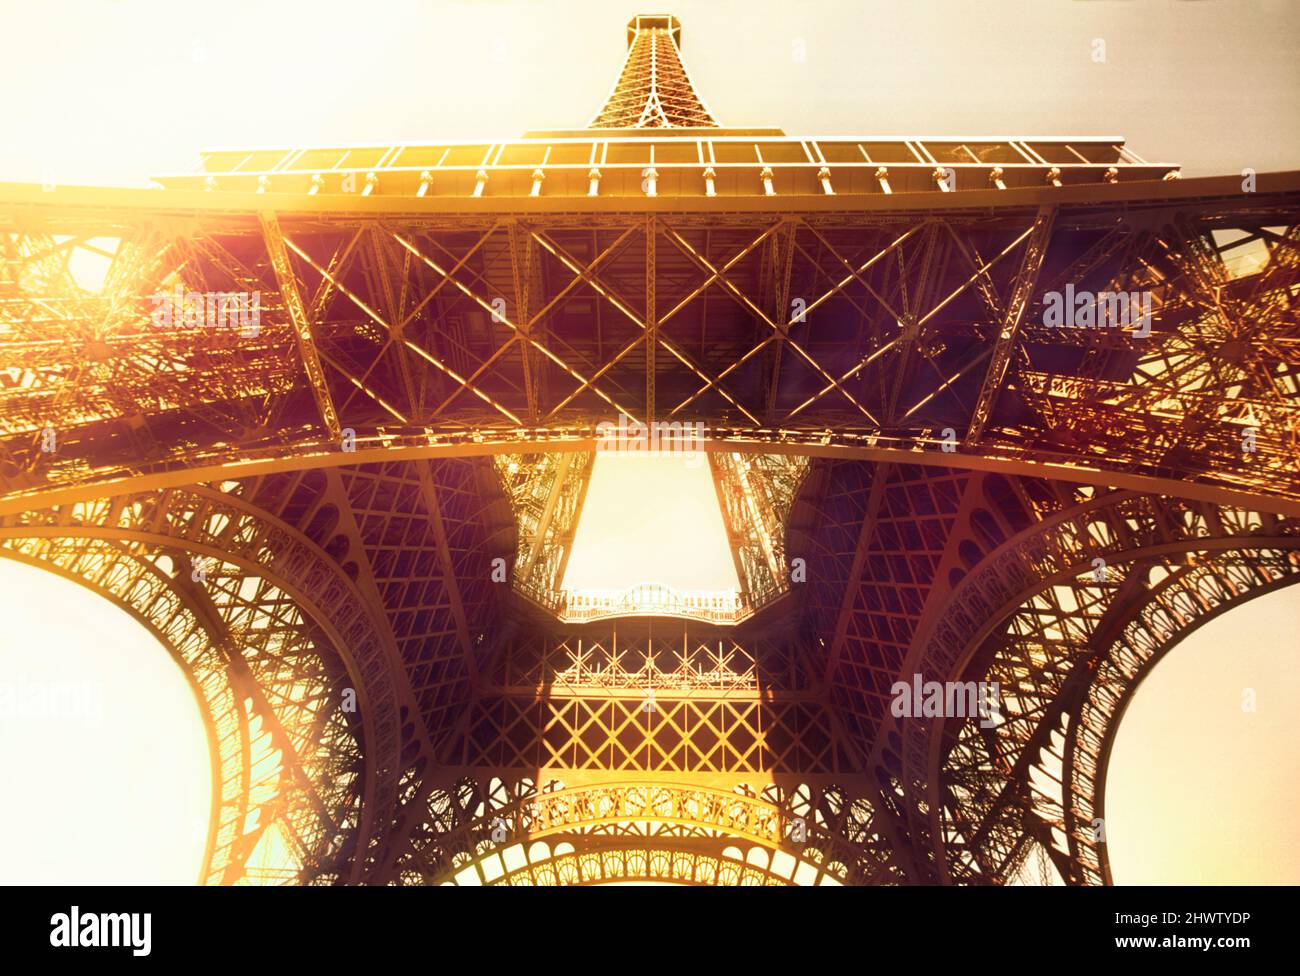 Eiffel Tower, Paris, dawn. Looking up at the landmark iconic wrought iron lattice monument and glaring sunlight. Belle Epoque architecture France Stock Photo